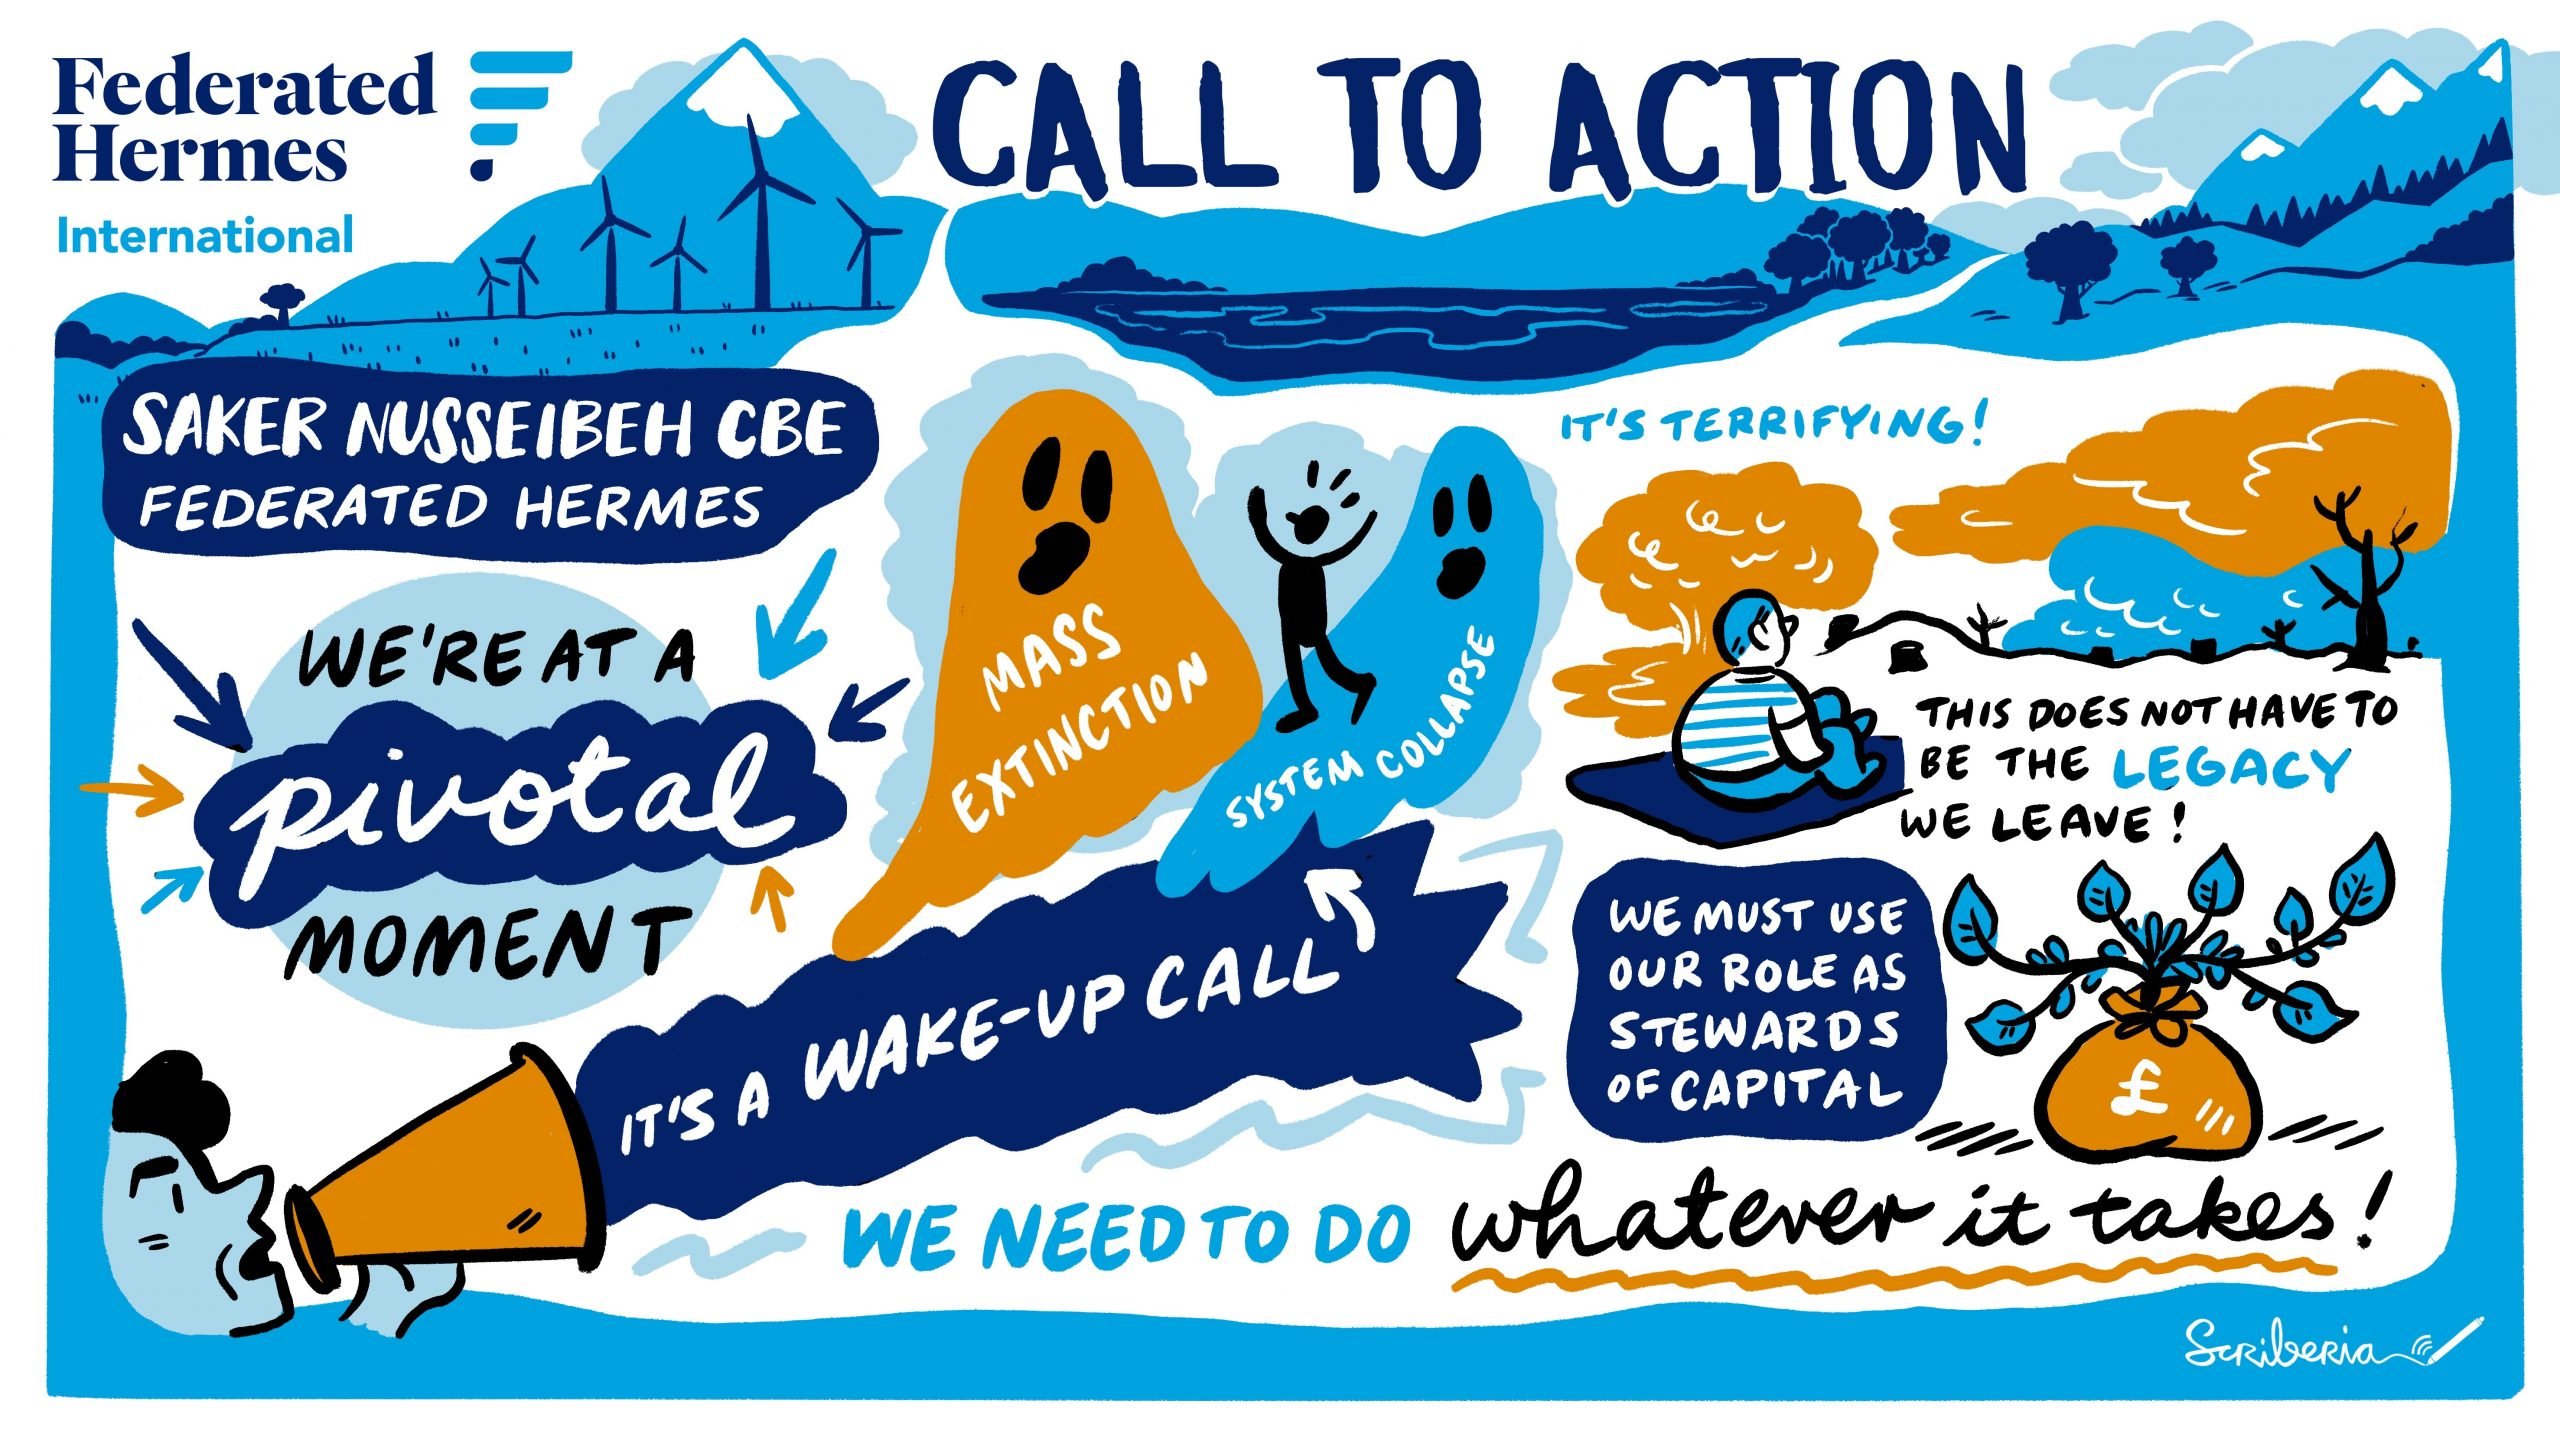 Call to Action infographic